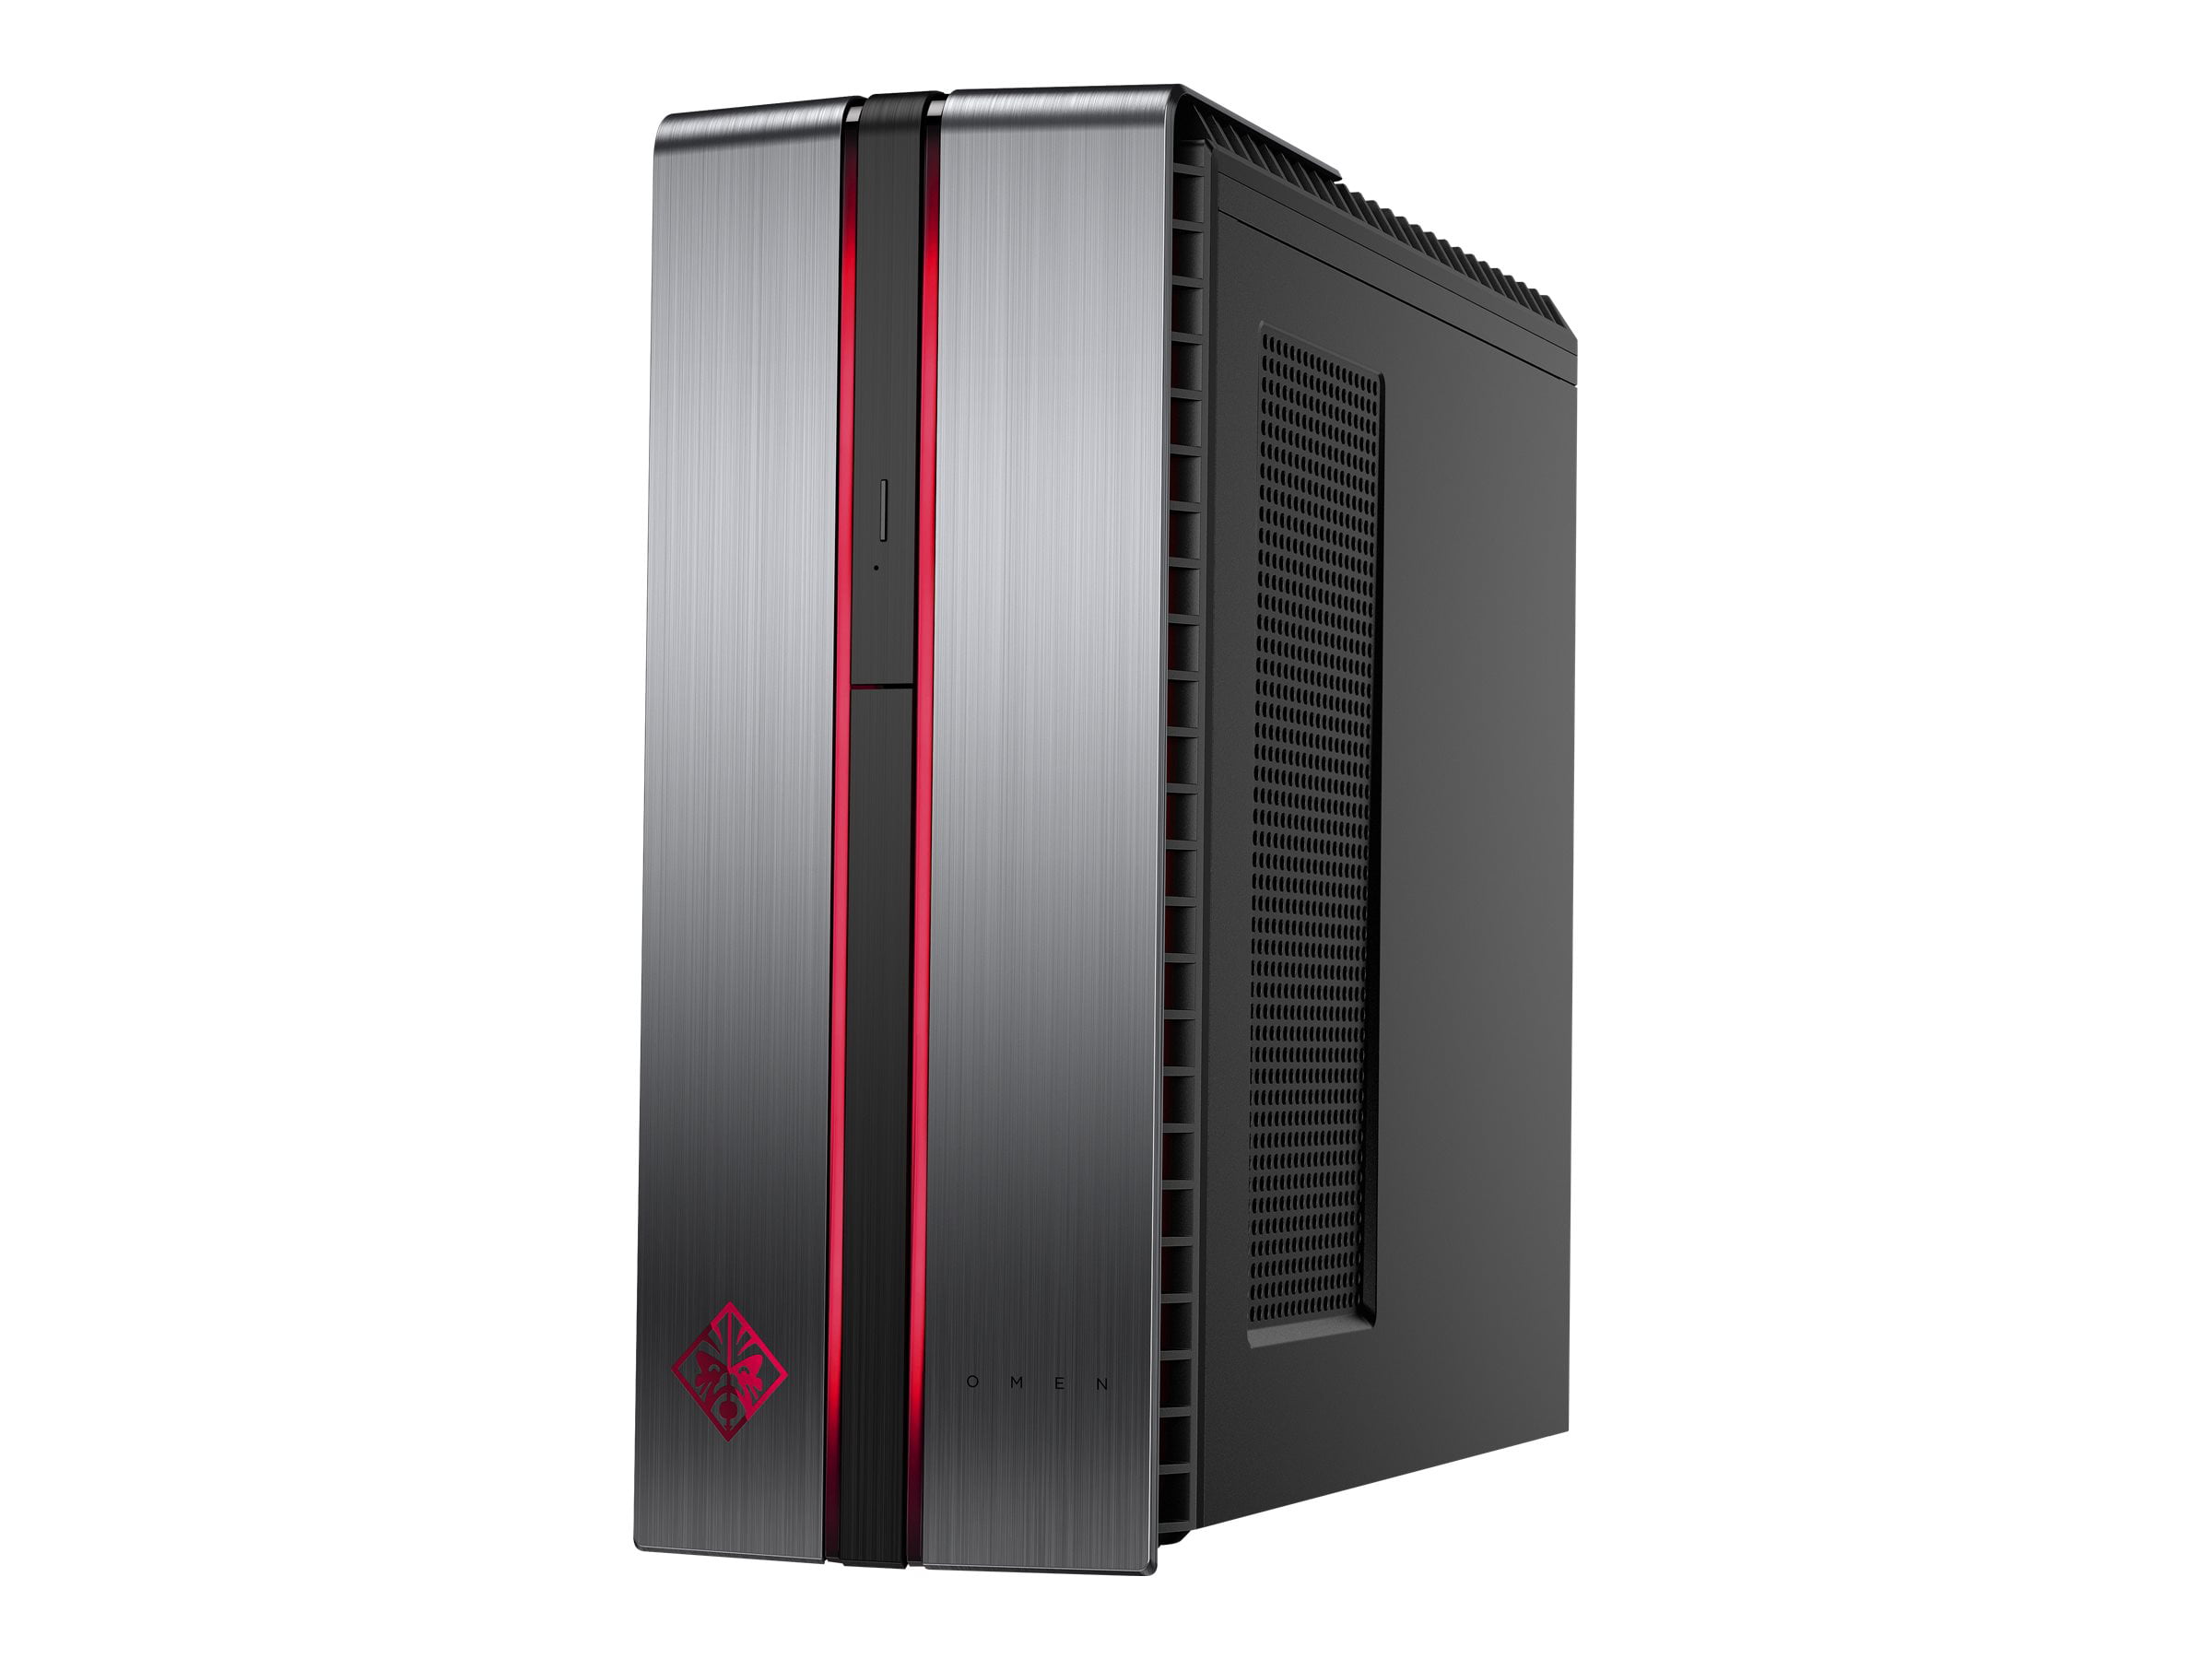 HP OMEN 870-230 Gaming Desktop PC with Intel Core i7-7700 Processor, 8GB  Memory, 256GB Solid State Drive + 1TB Hard Drive and Windows 10 Home  (Monitor 